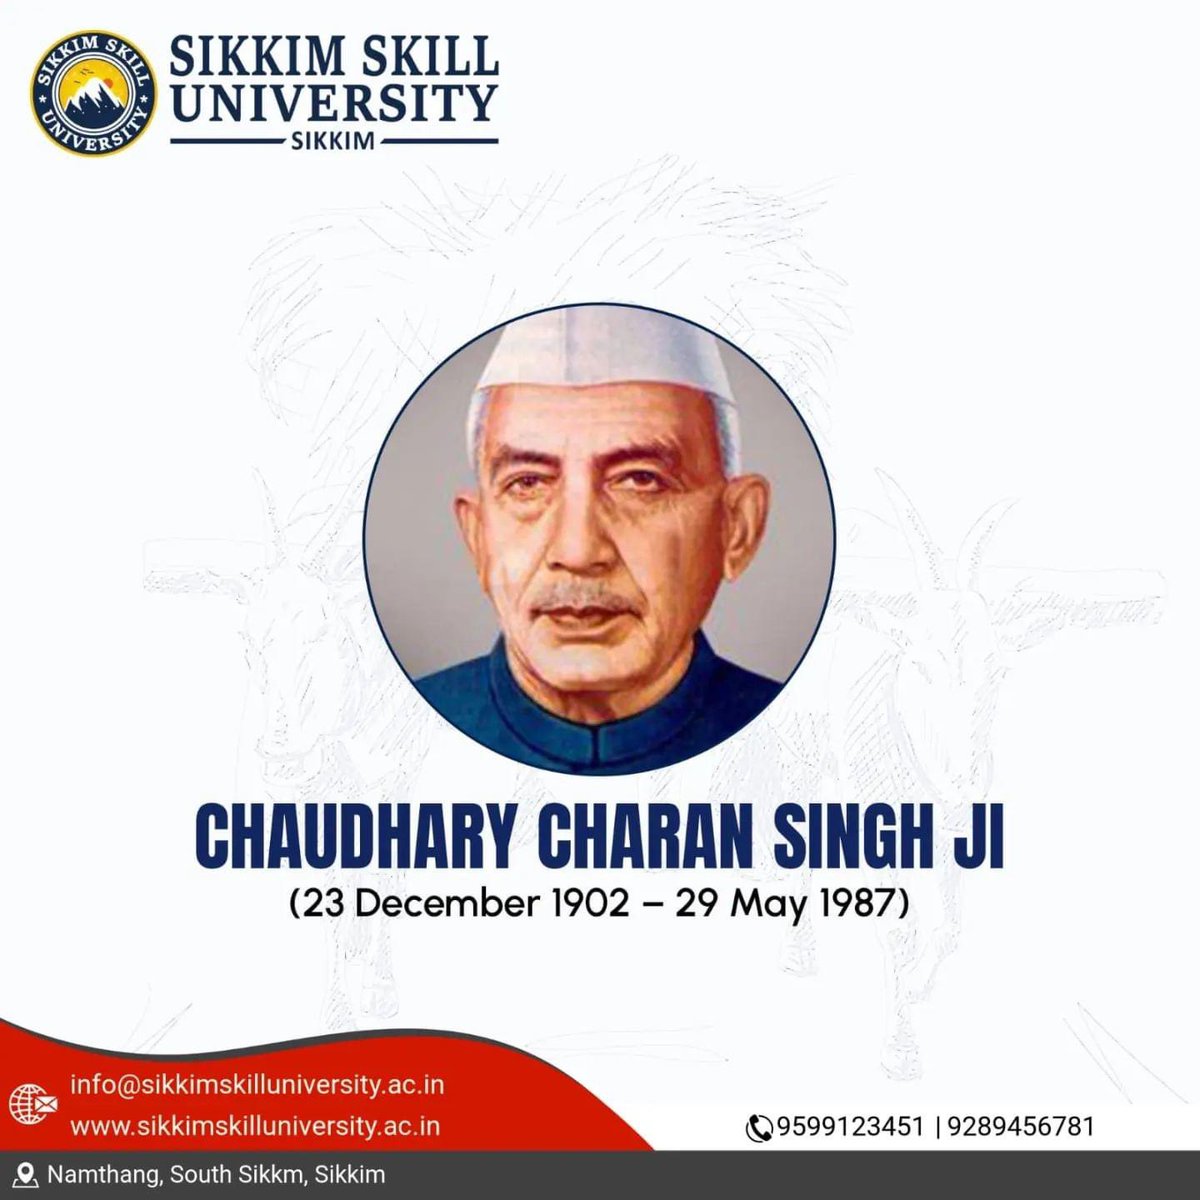 'Remembering the visionary leader Chaudhary Charan Singh on his birth anniversary, whose passion for farmers' well-being continues to inspire us all. #ChaudharyCharanSinghJayanti #sikkimskilluniversity #namthang #southsikkim #sikkim